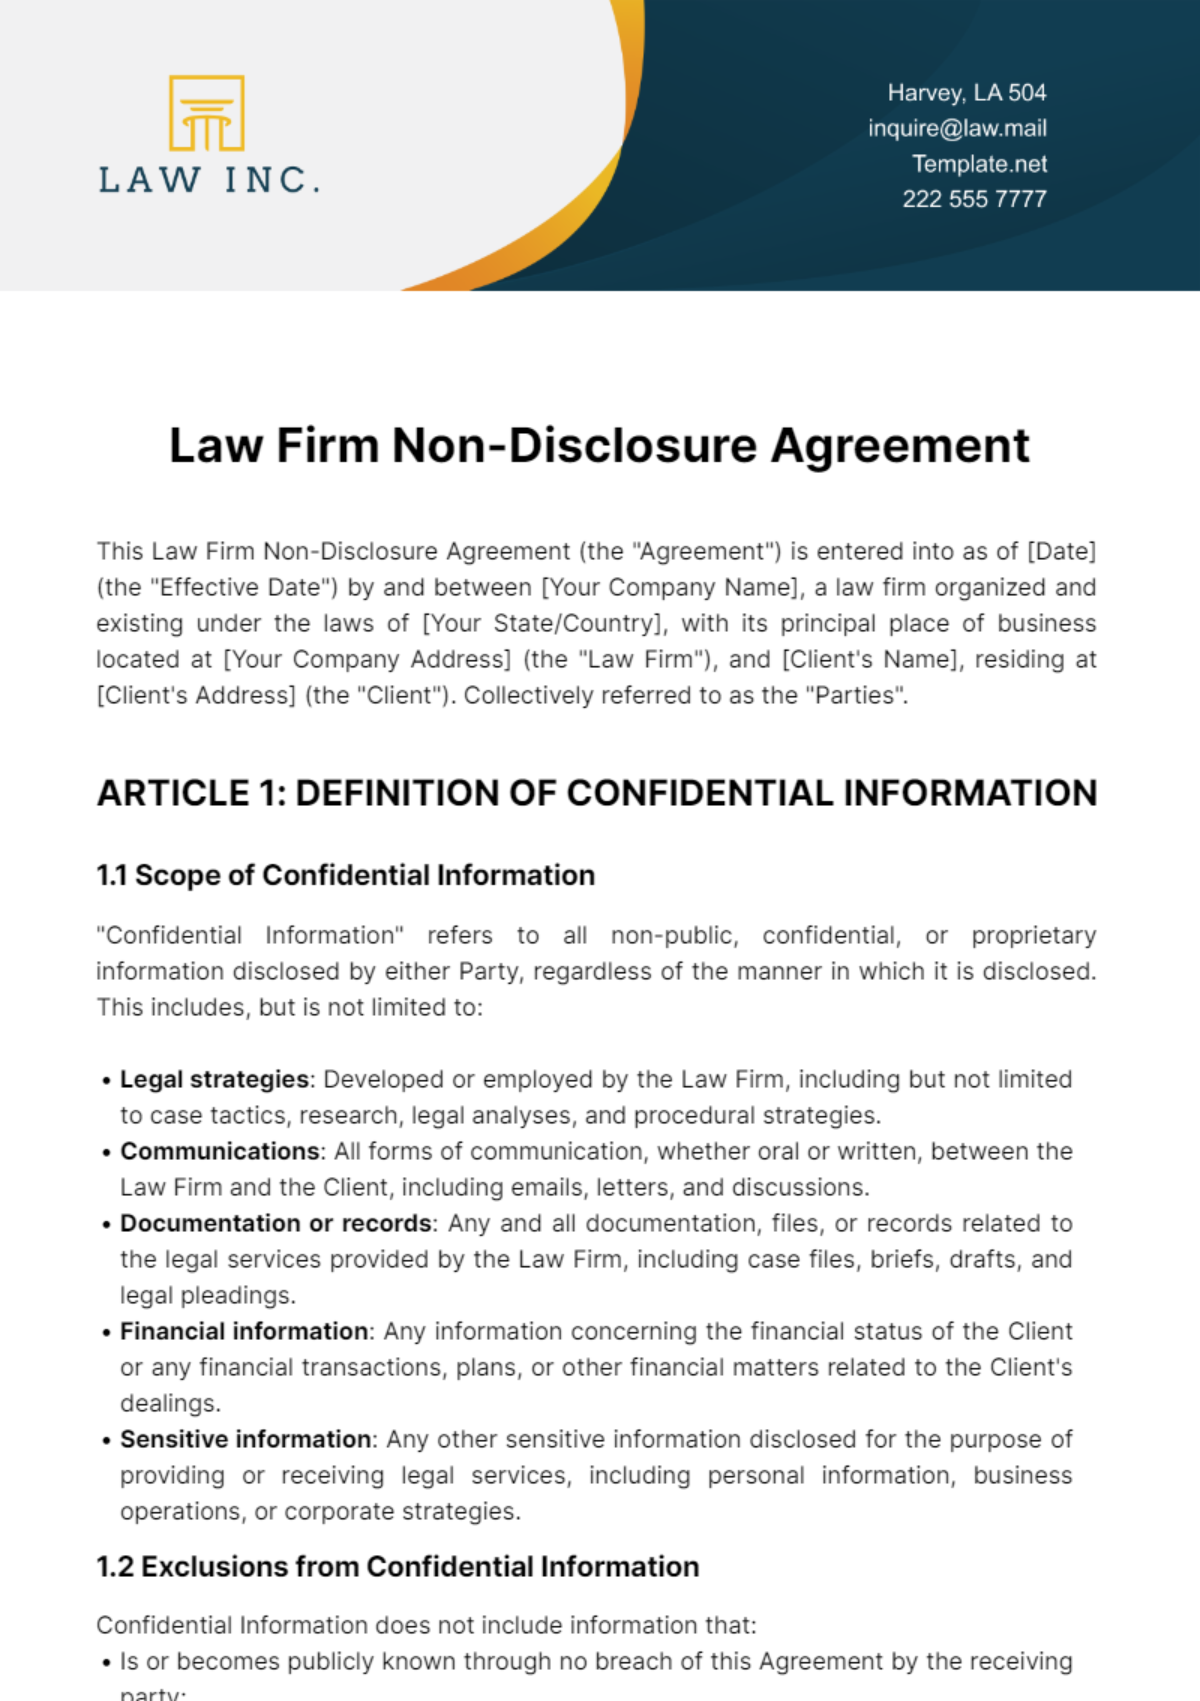 Law Firm Non-Disclosure Agreement Template